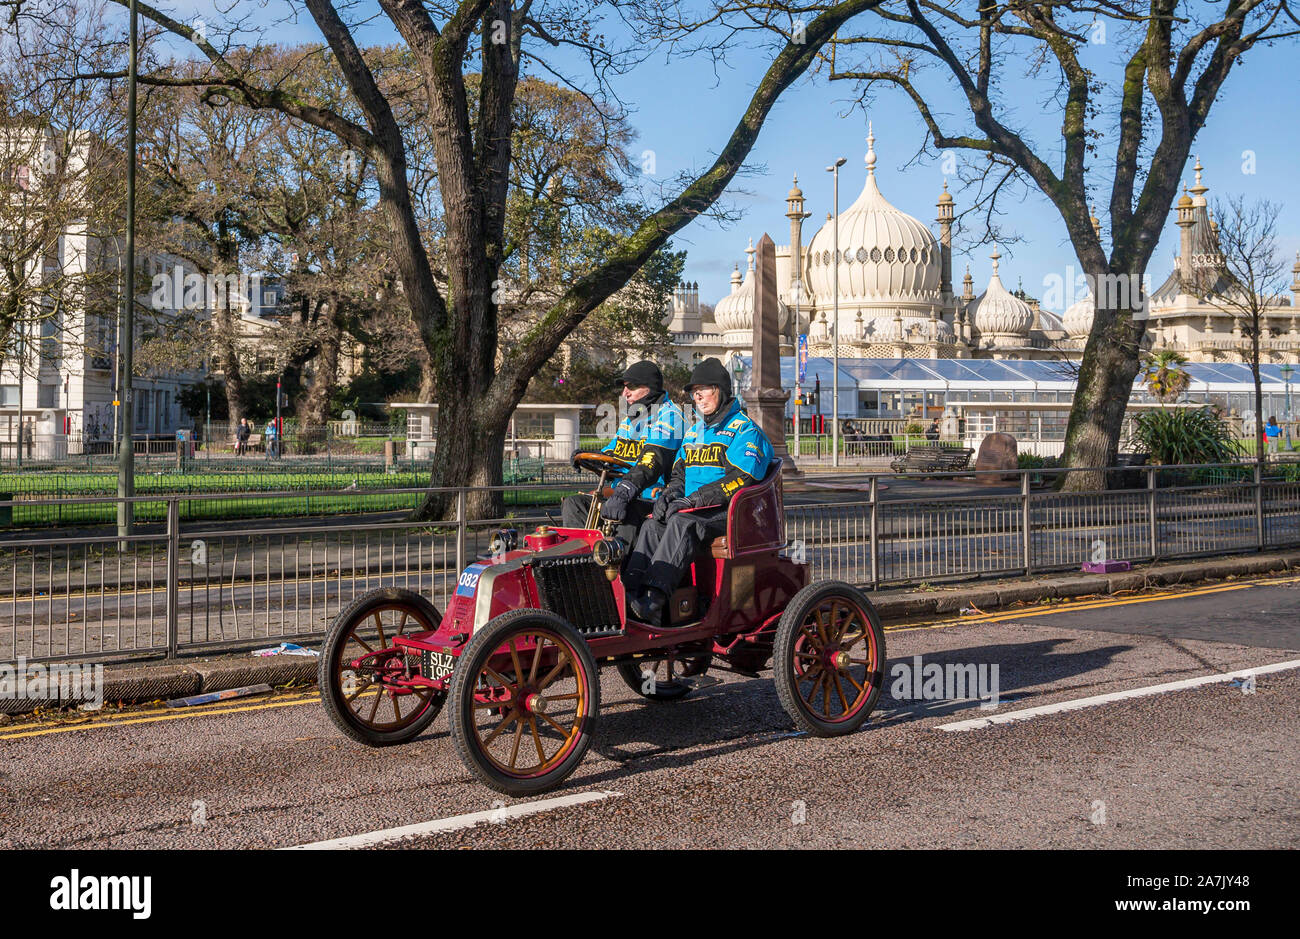 Brighton UK 3rd November 2019 - A 1901 Renault passes by the Royal Pavilion in Brighton as they near the finish of the Bonhams London to Brighton Veteran Car Run. Over 400 pre-1905 cars set off from Hyde Park London early this morning and finish at Brighton's Madeira Drive on the seafront : Credit Simon Dack / Alamy Live News Stock Photo